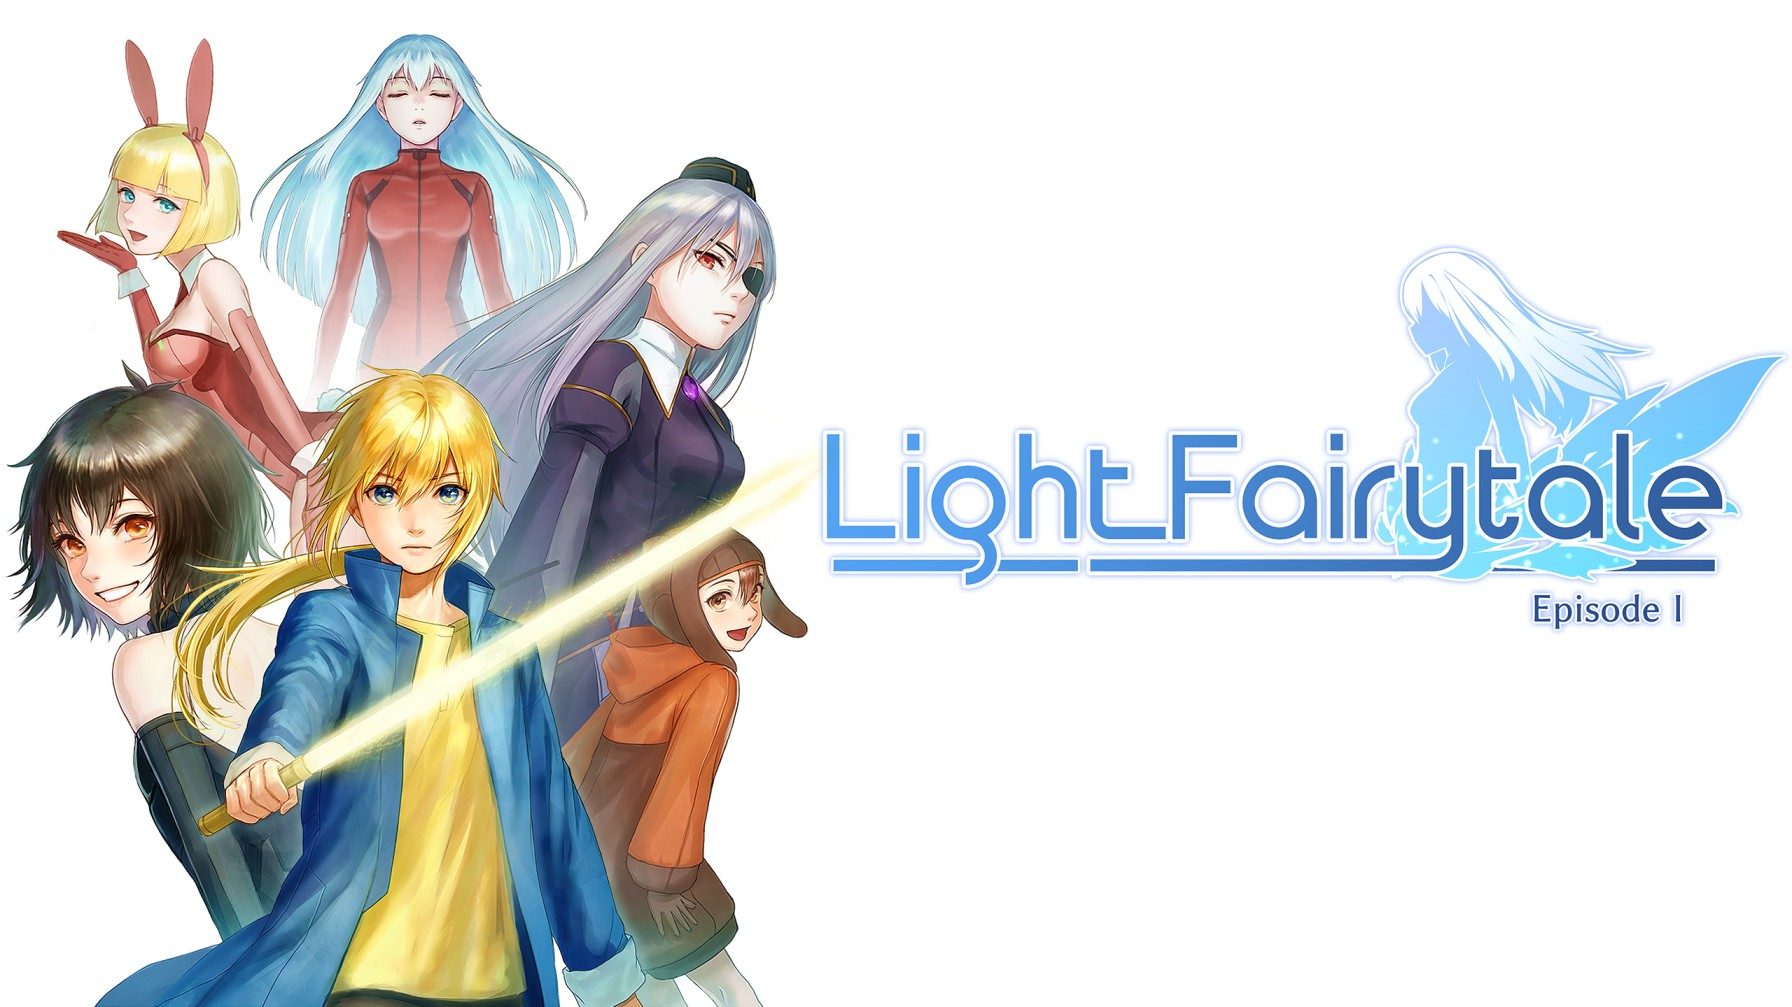 Light Fairytale Episode 1 is coming to Switch